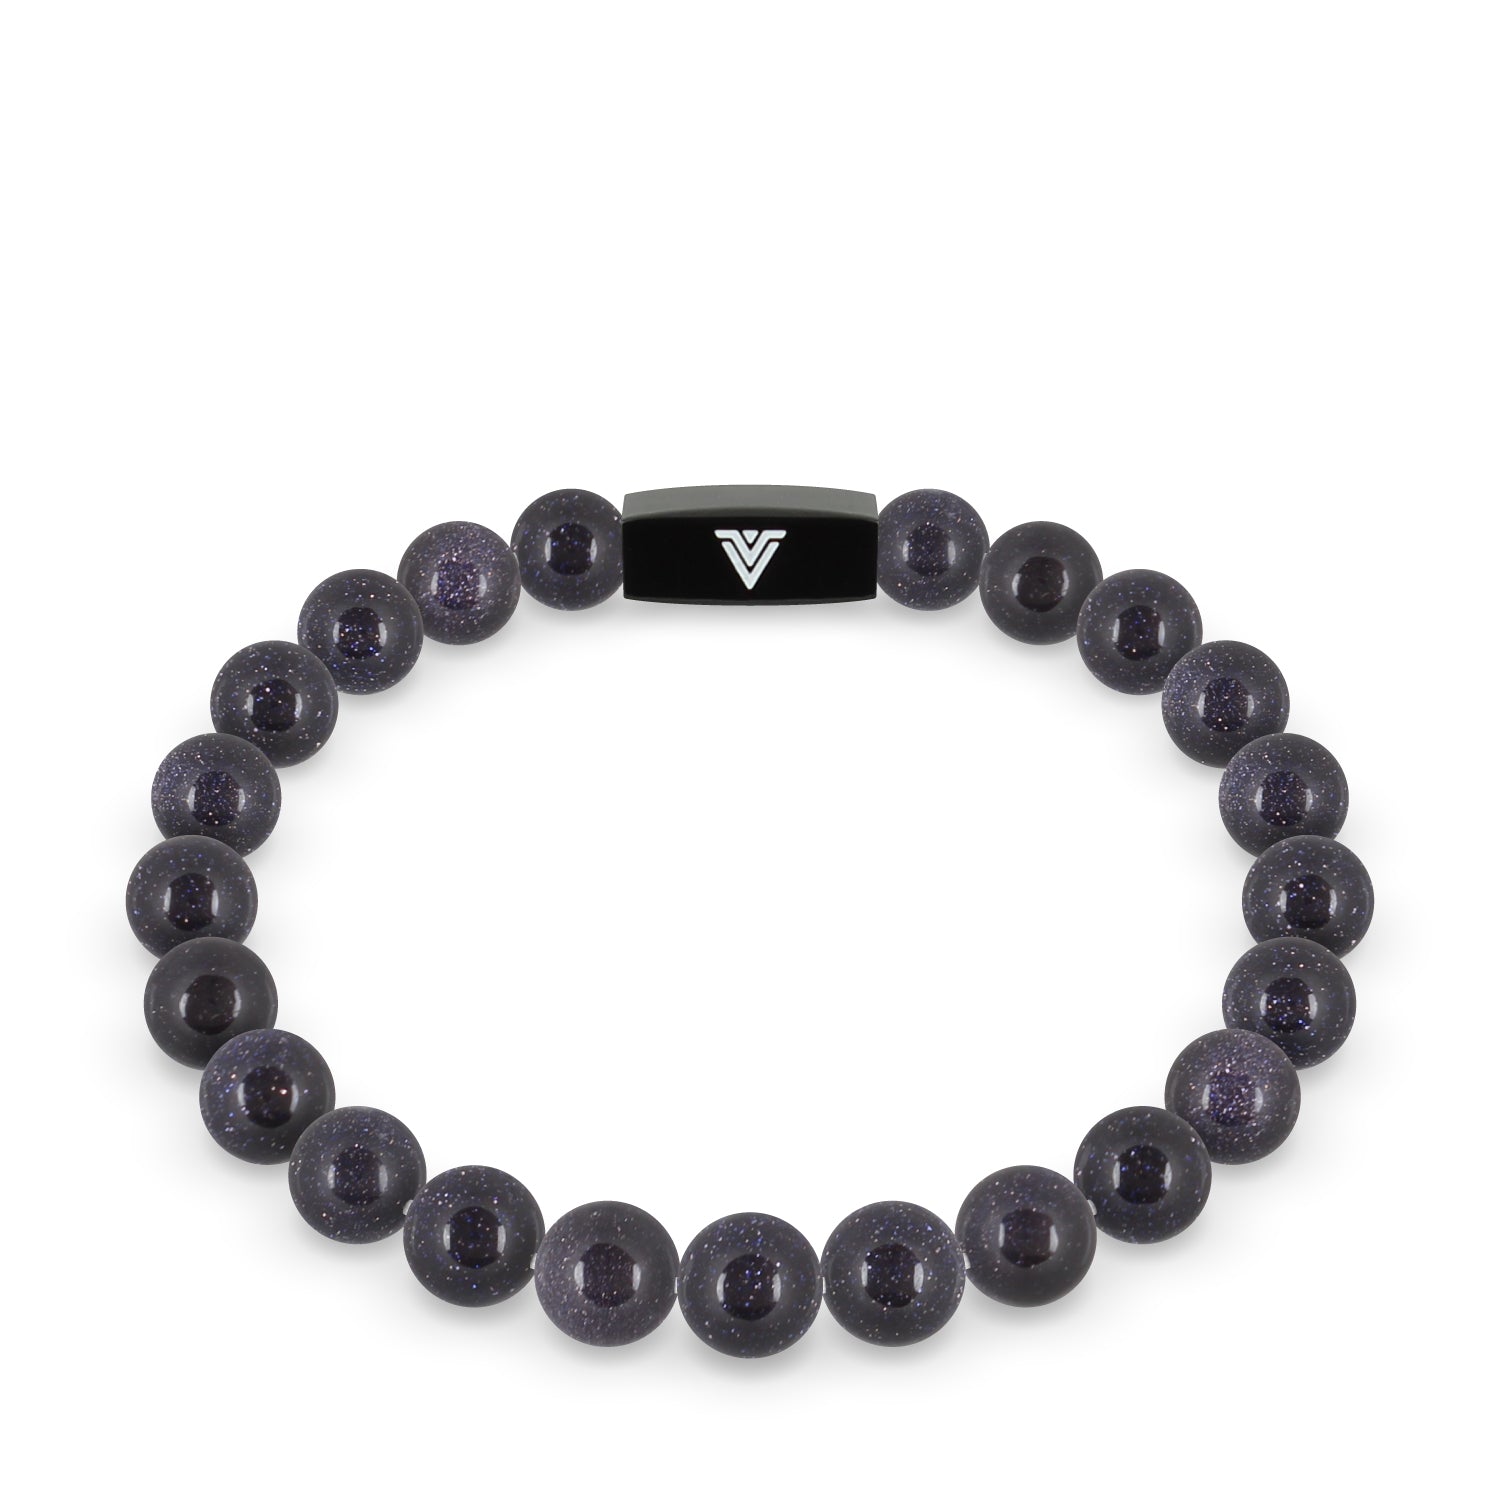 Front view of an 8mm Blue Goldstone crystal beaded stretch bracelet with black stainless steel logo bead made by Voltlin